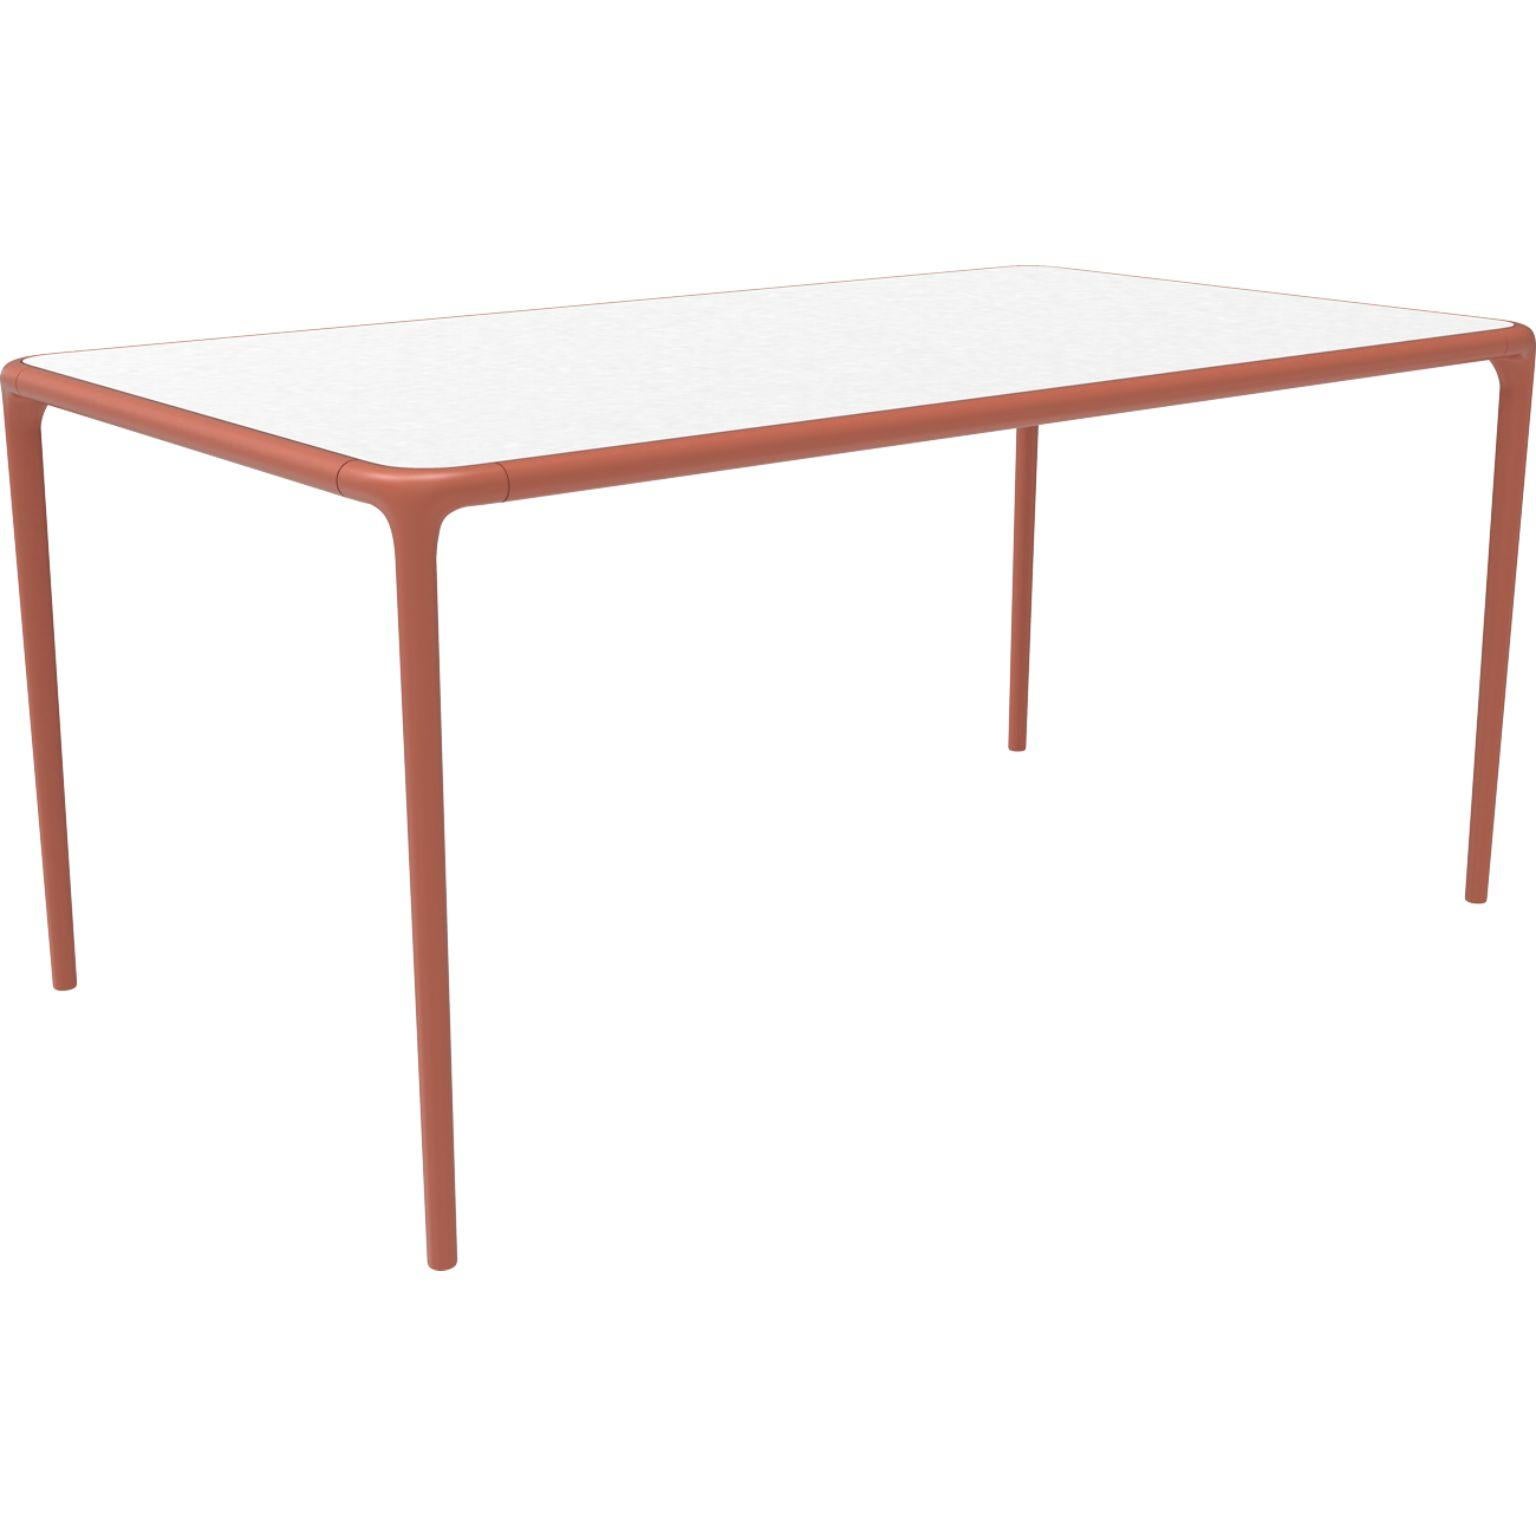 Xaloc Salmon glass top table 160 by Mowee
Dimensions: D 160 x W 90 x H 74 cm
Material: Aluminum, tinted tempered glass top.
Also available in different aluminum colors and finishes (HPL Black Edge or Neolith).

 Xaloc synthesizes the lines of